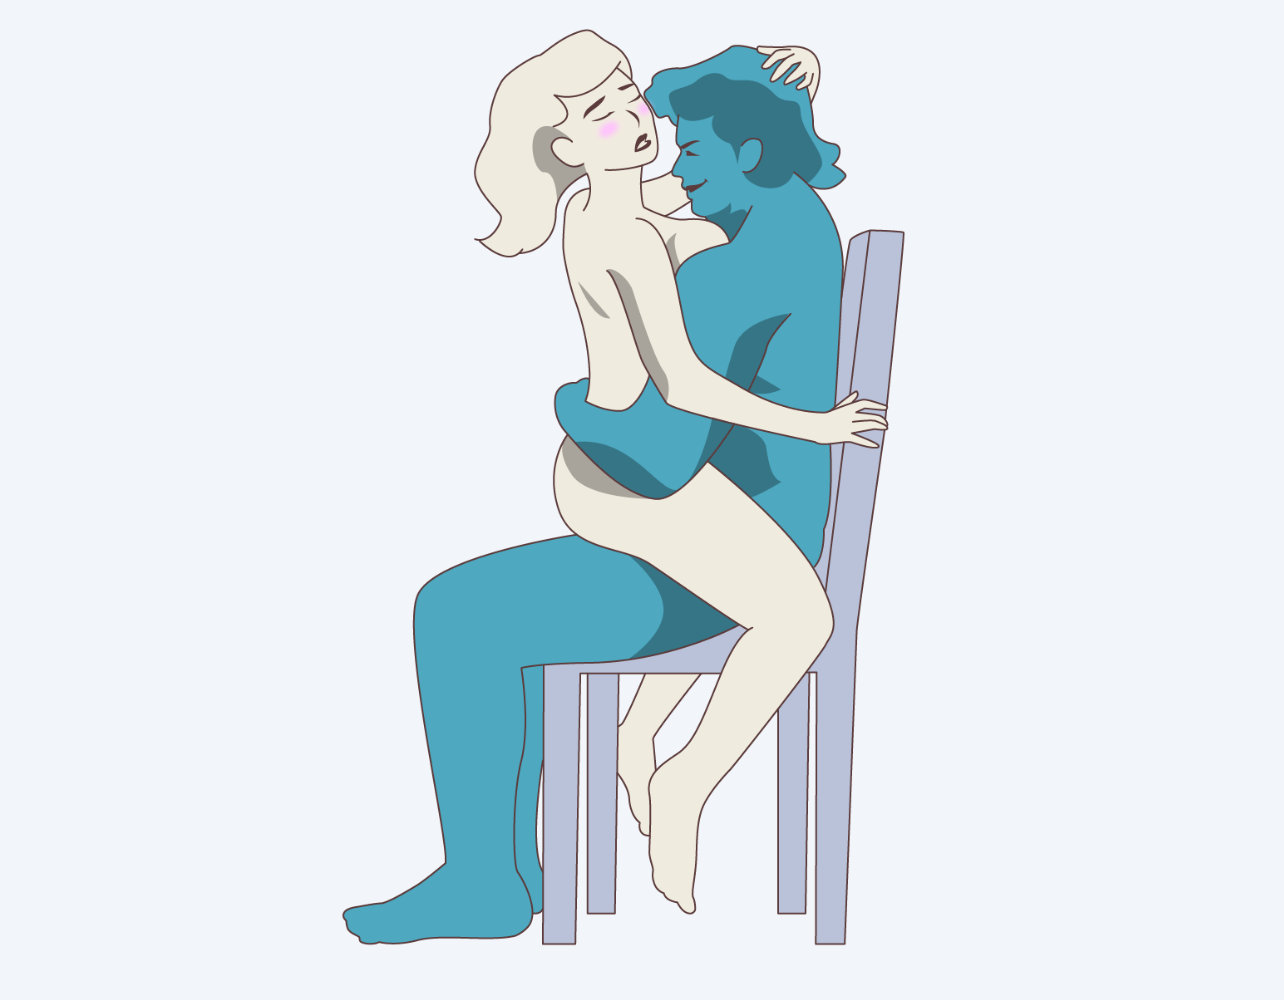 On a chair Anal Sex Position Illustration